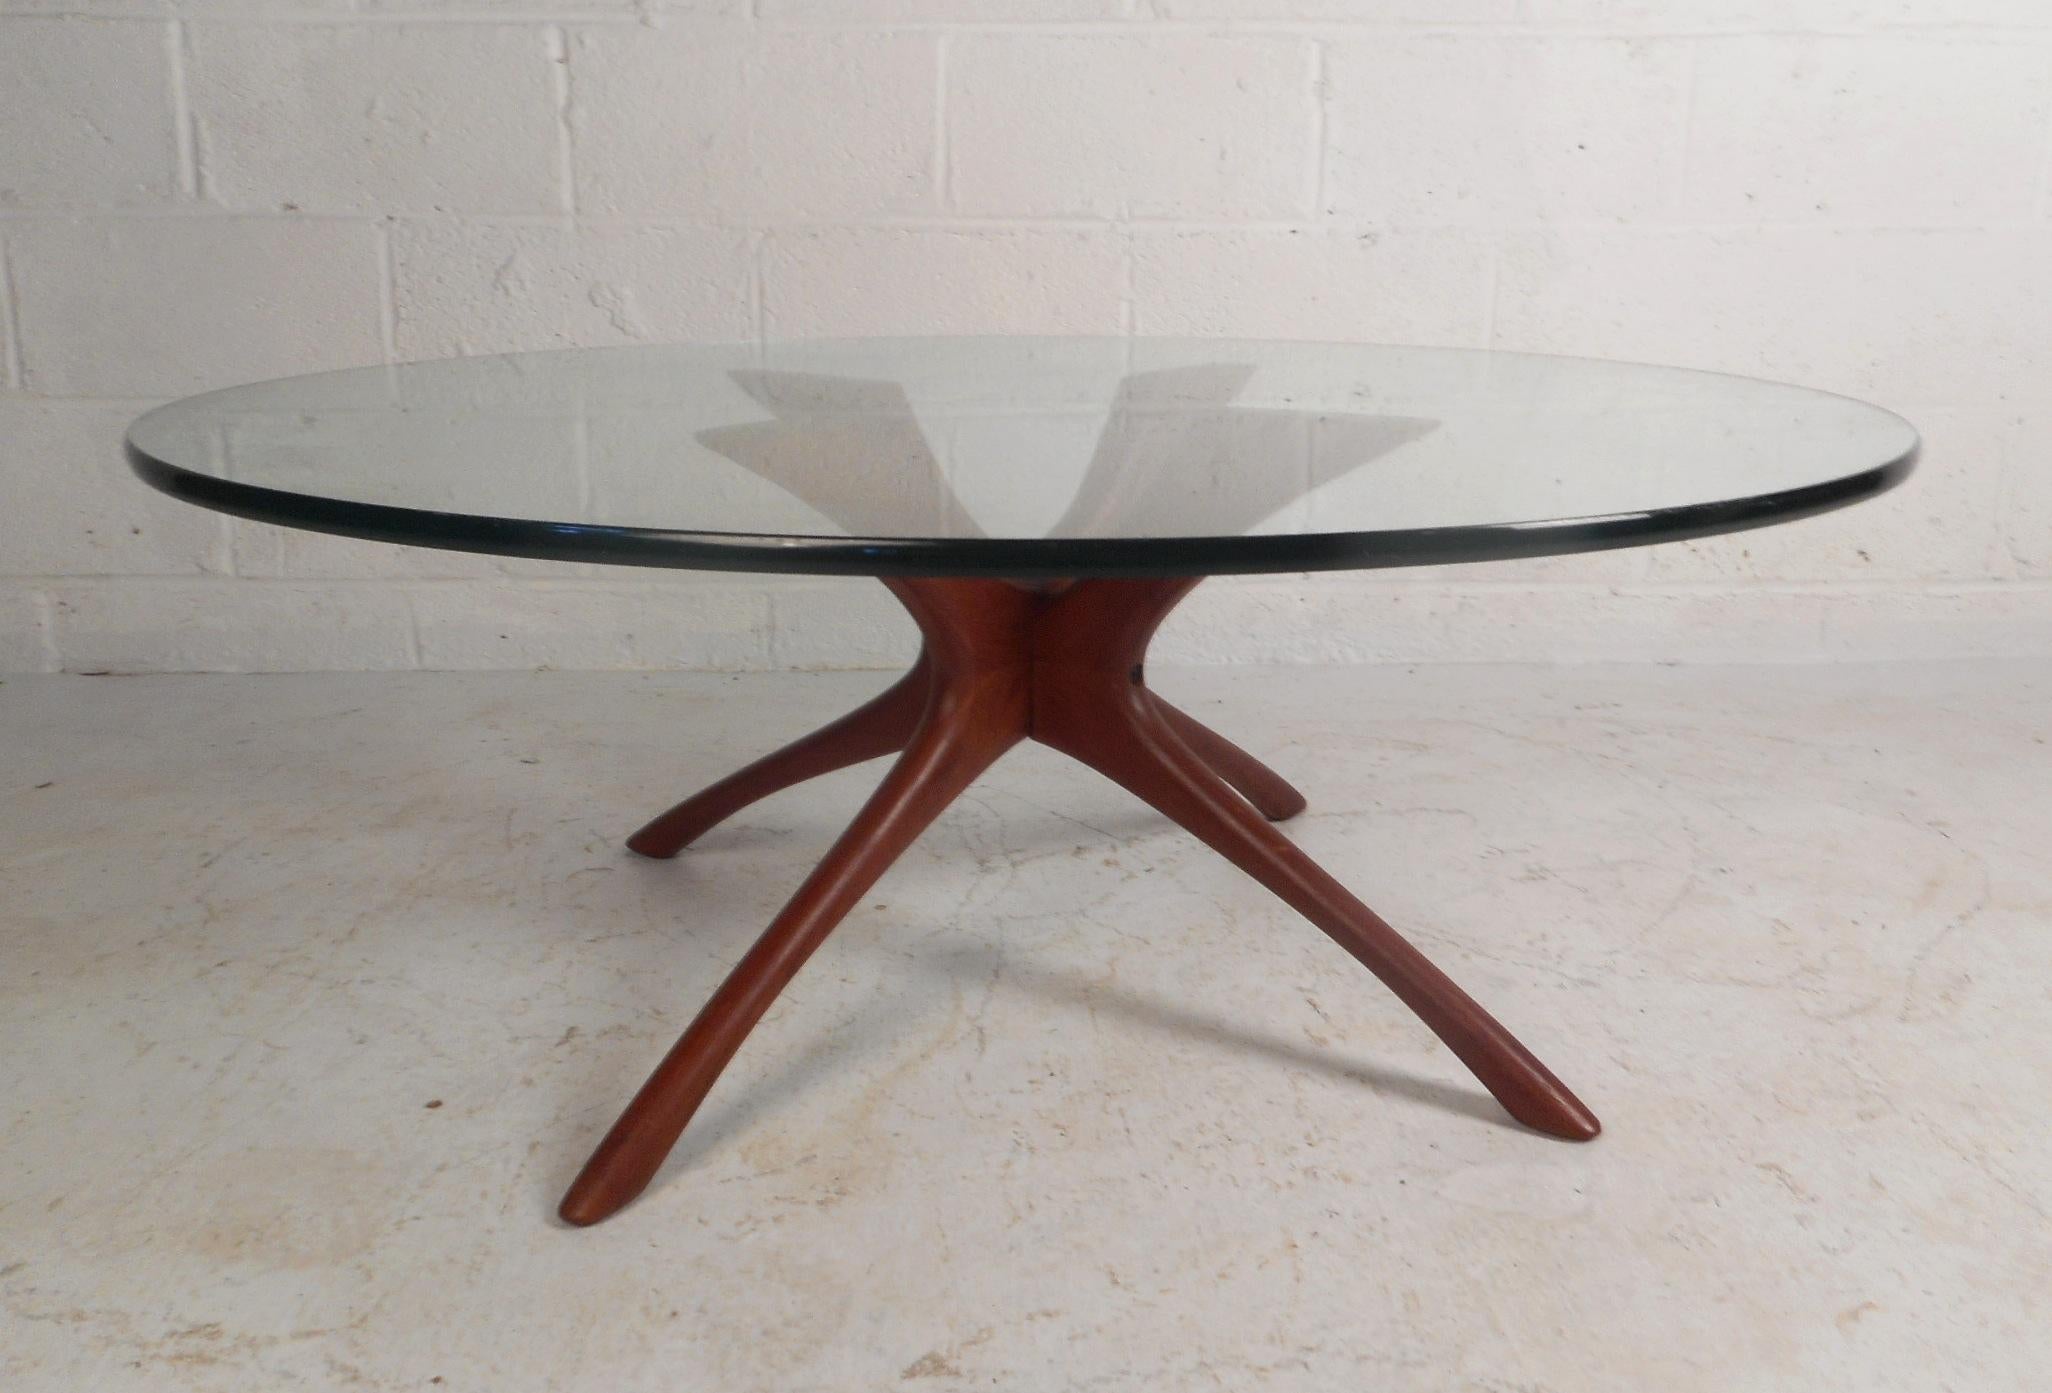 This gorgeous vintage modern cocktail table features a thick round glass top and a sculpted walnut base. A sleek and sturdy design by Adrian Pearsall that is sure to make a lasting impression in any modern interior. Please confirm item location (NY